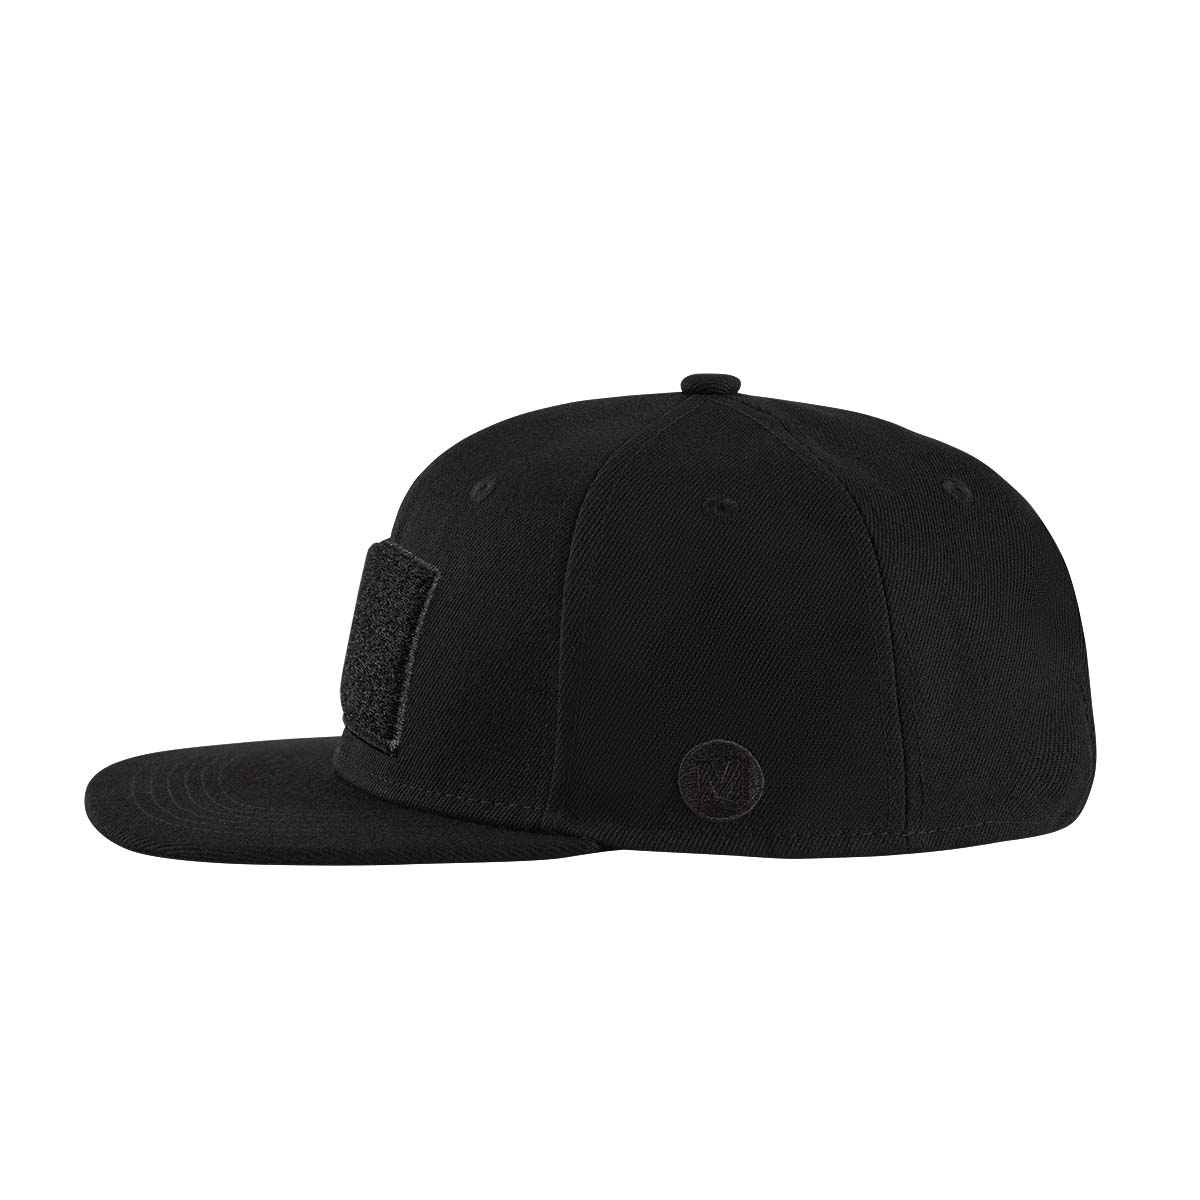 TACTICAL PATCH SNAPBACK - BLACK - Side View